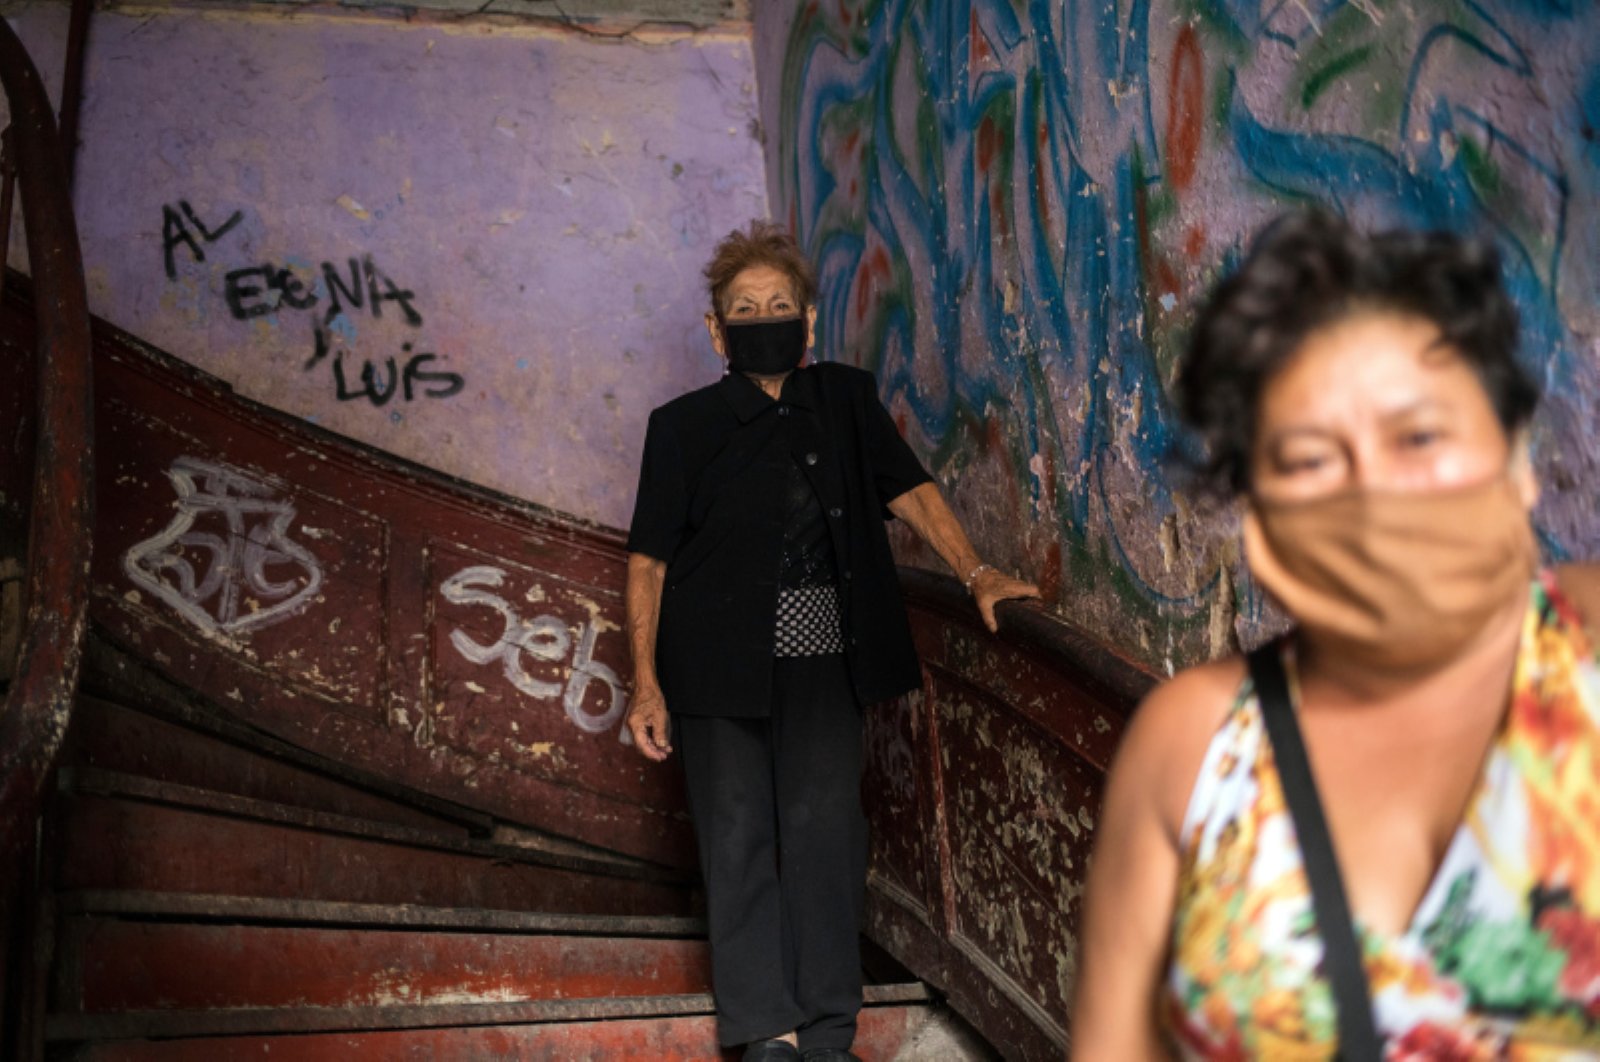 Maria Isabel Aguinaga, 72, wearing a protective face mask, descends the stairs of her crumbling residential building nicknamed “Luriganchito” after the country’s most populous prison, Lima, Peru, March 29, 2020. (AP Photo)